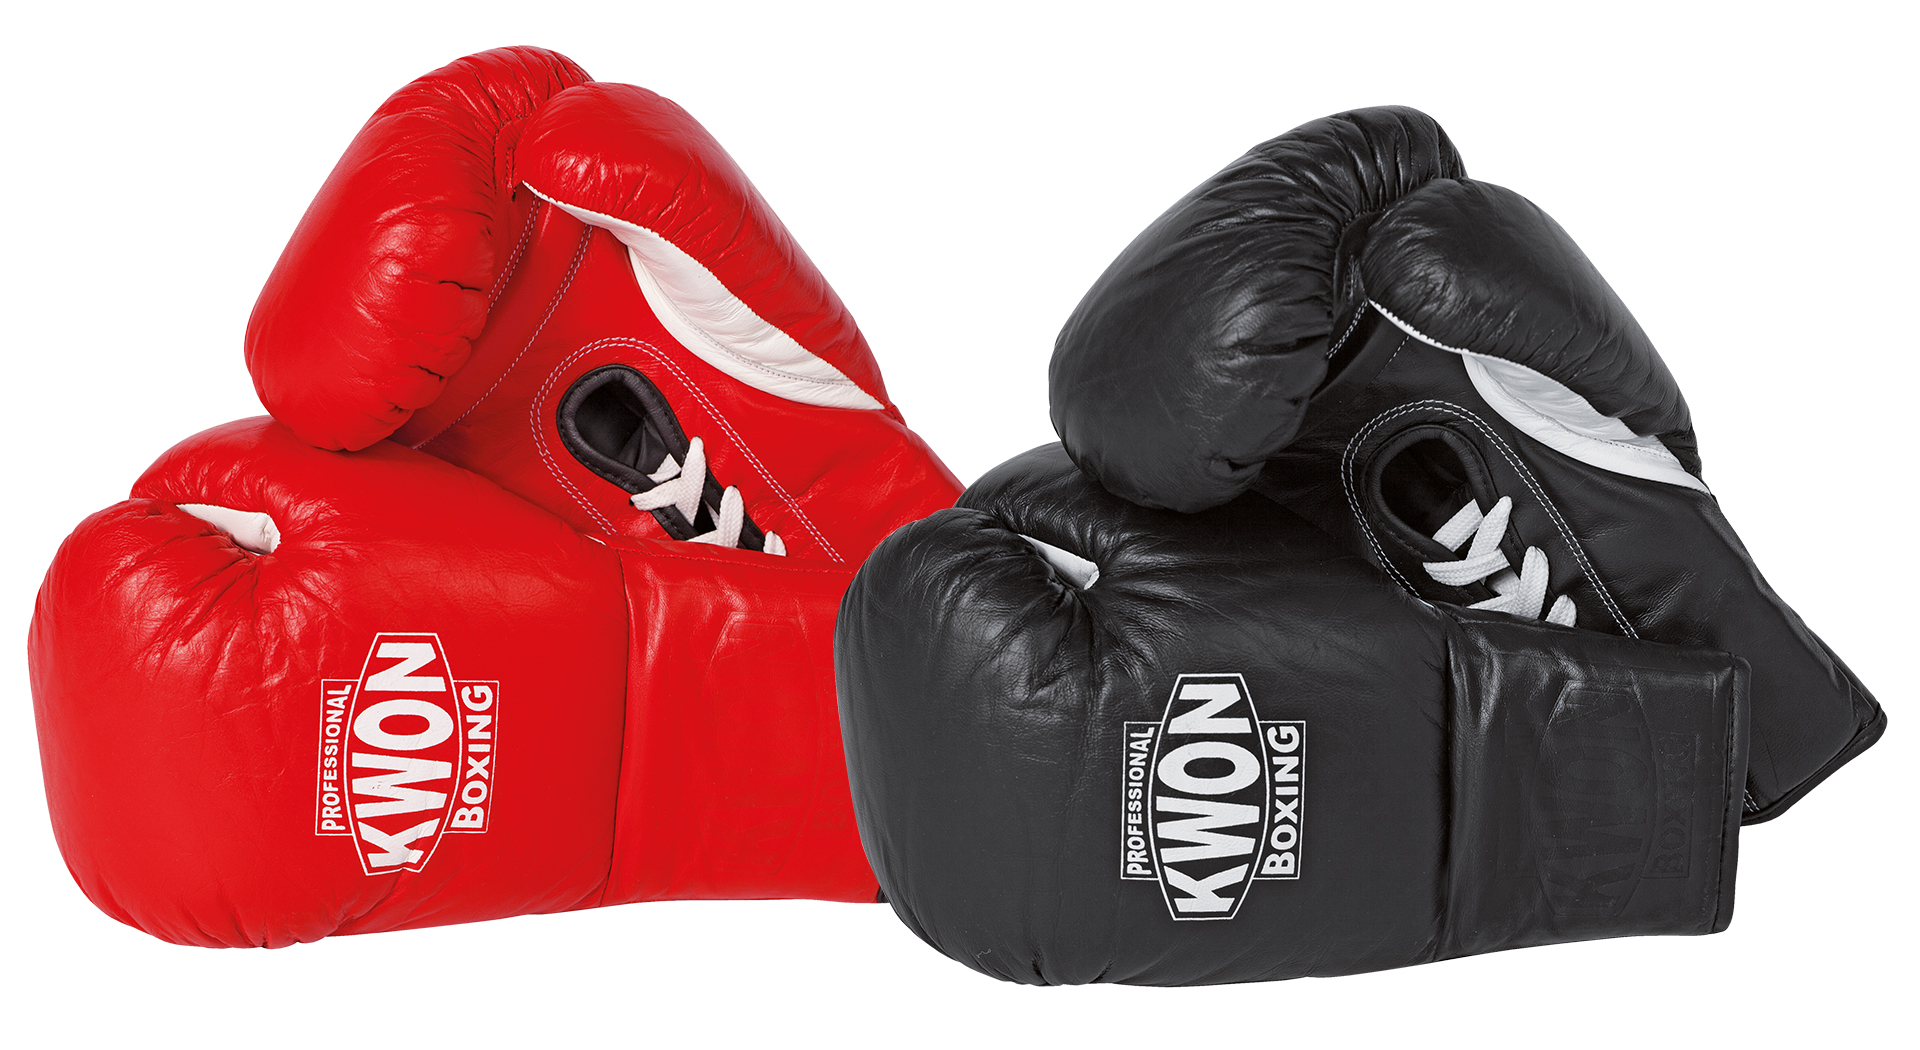 KWON PROFESSIONAL BOXING for with laces Gloves Leather competitions